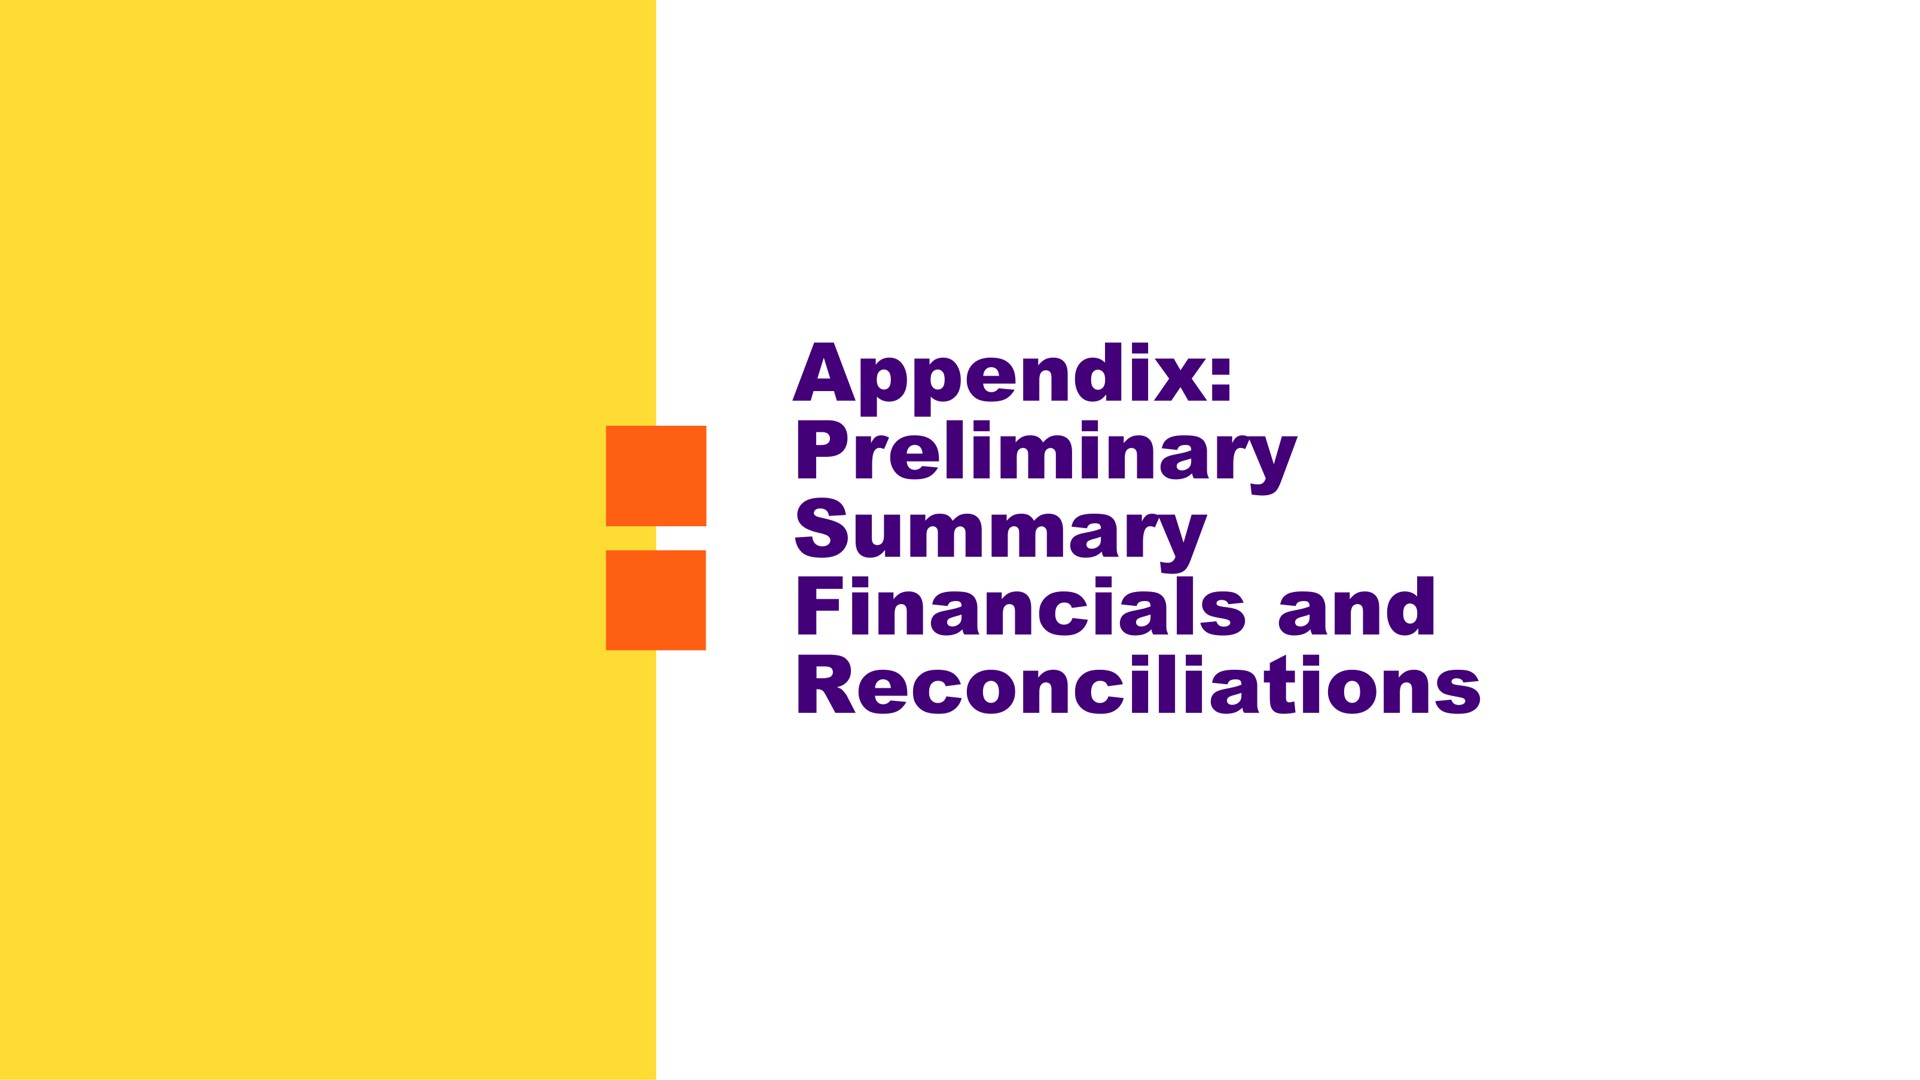 appendix preliminary summary and reconciliations | GlobalFoundries